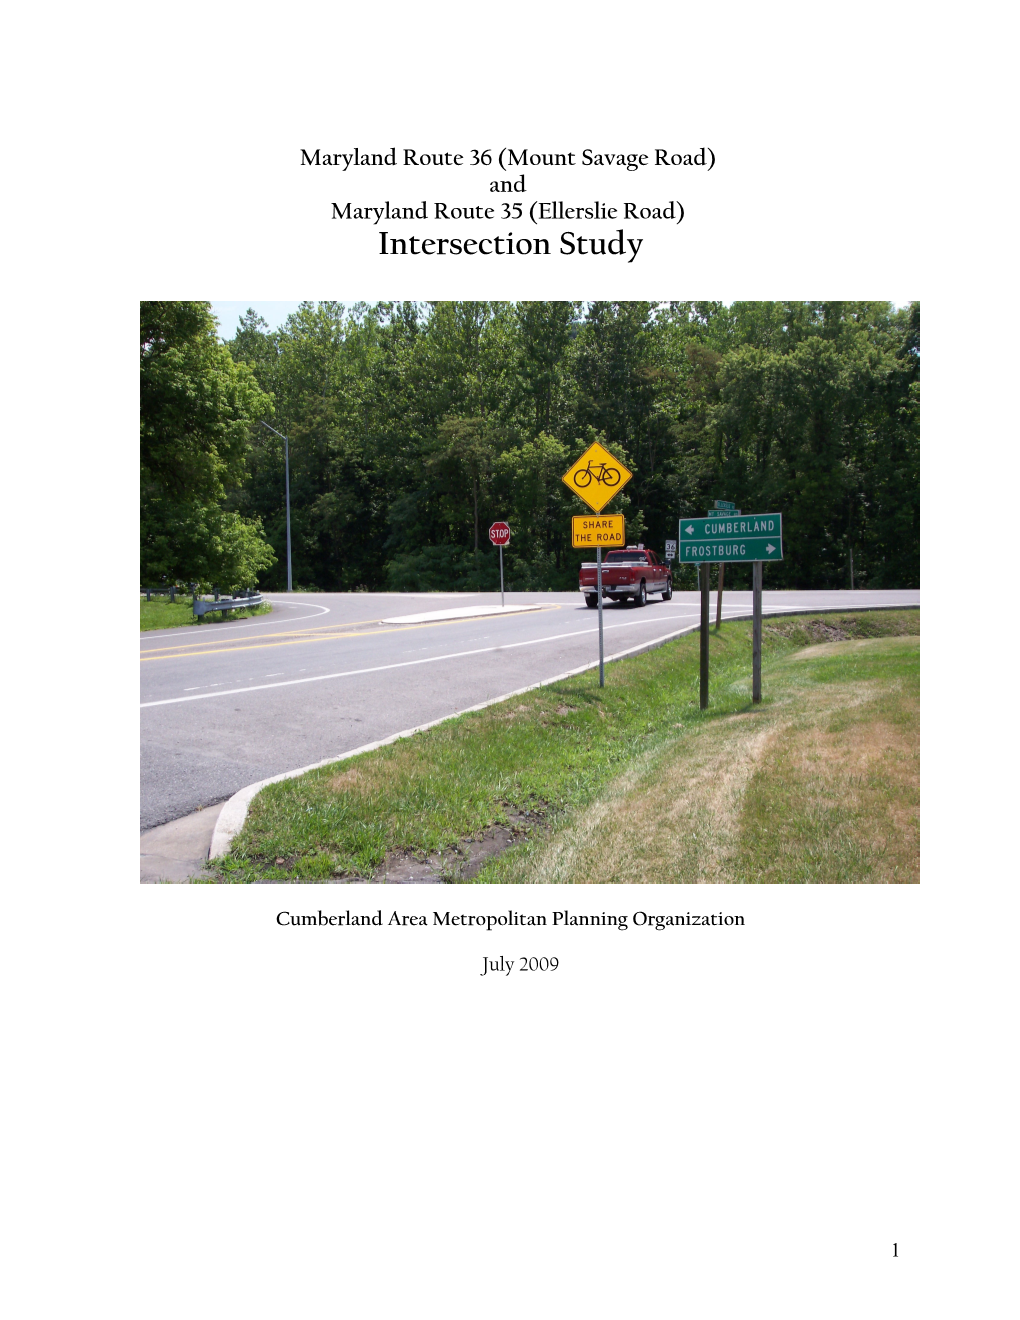 Maryland Route 36 (Mount Savage Road) and Maryland Route 35 (Ellerslie Road) Intersection Study